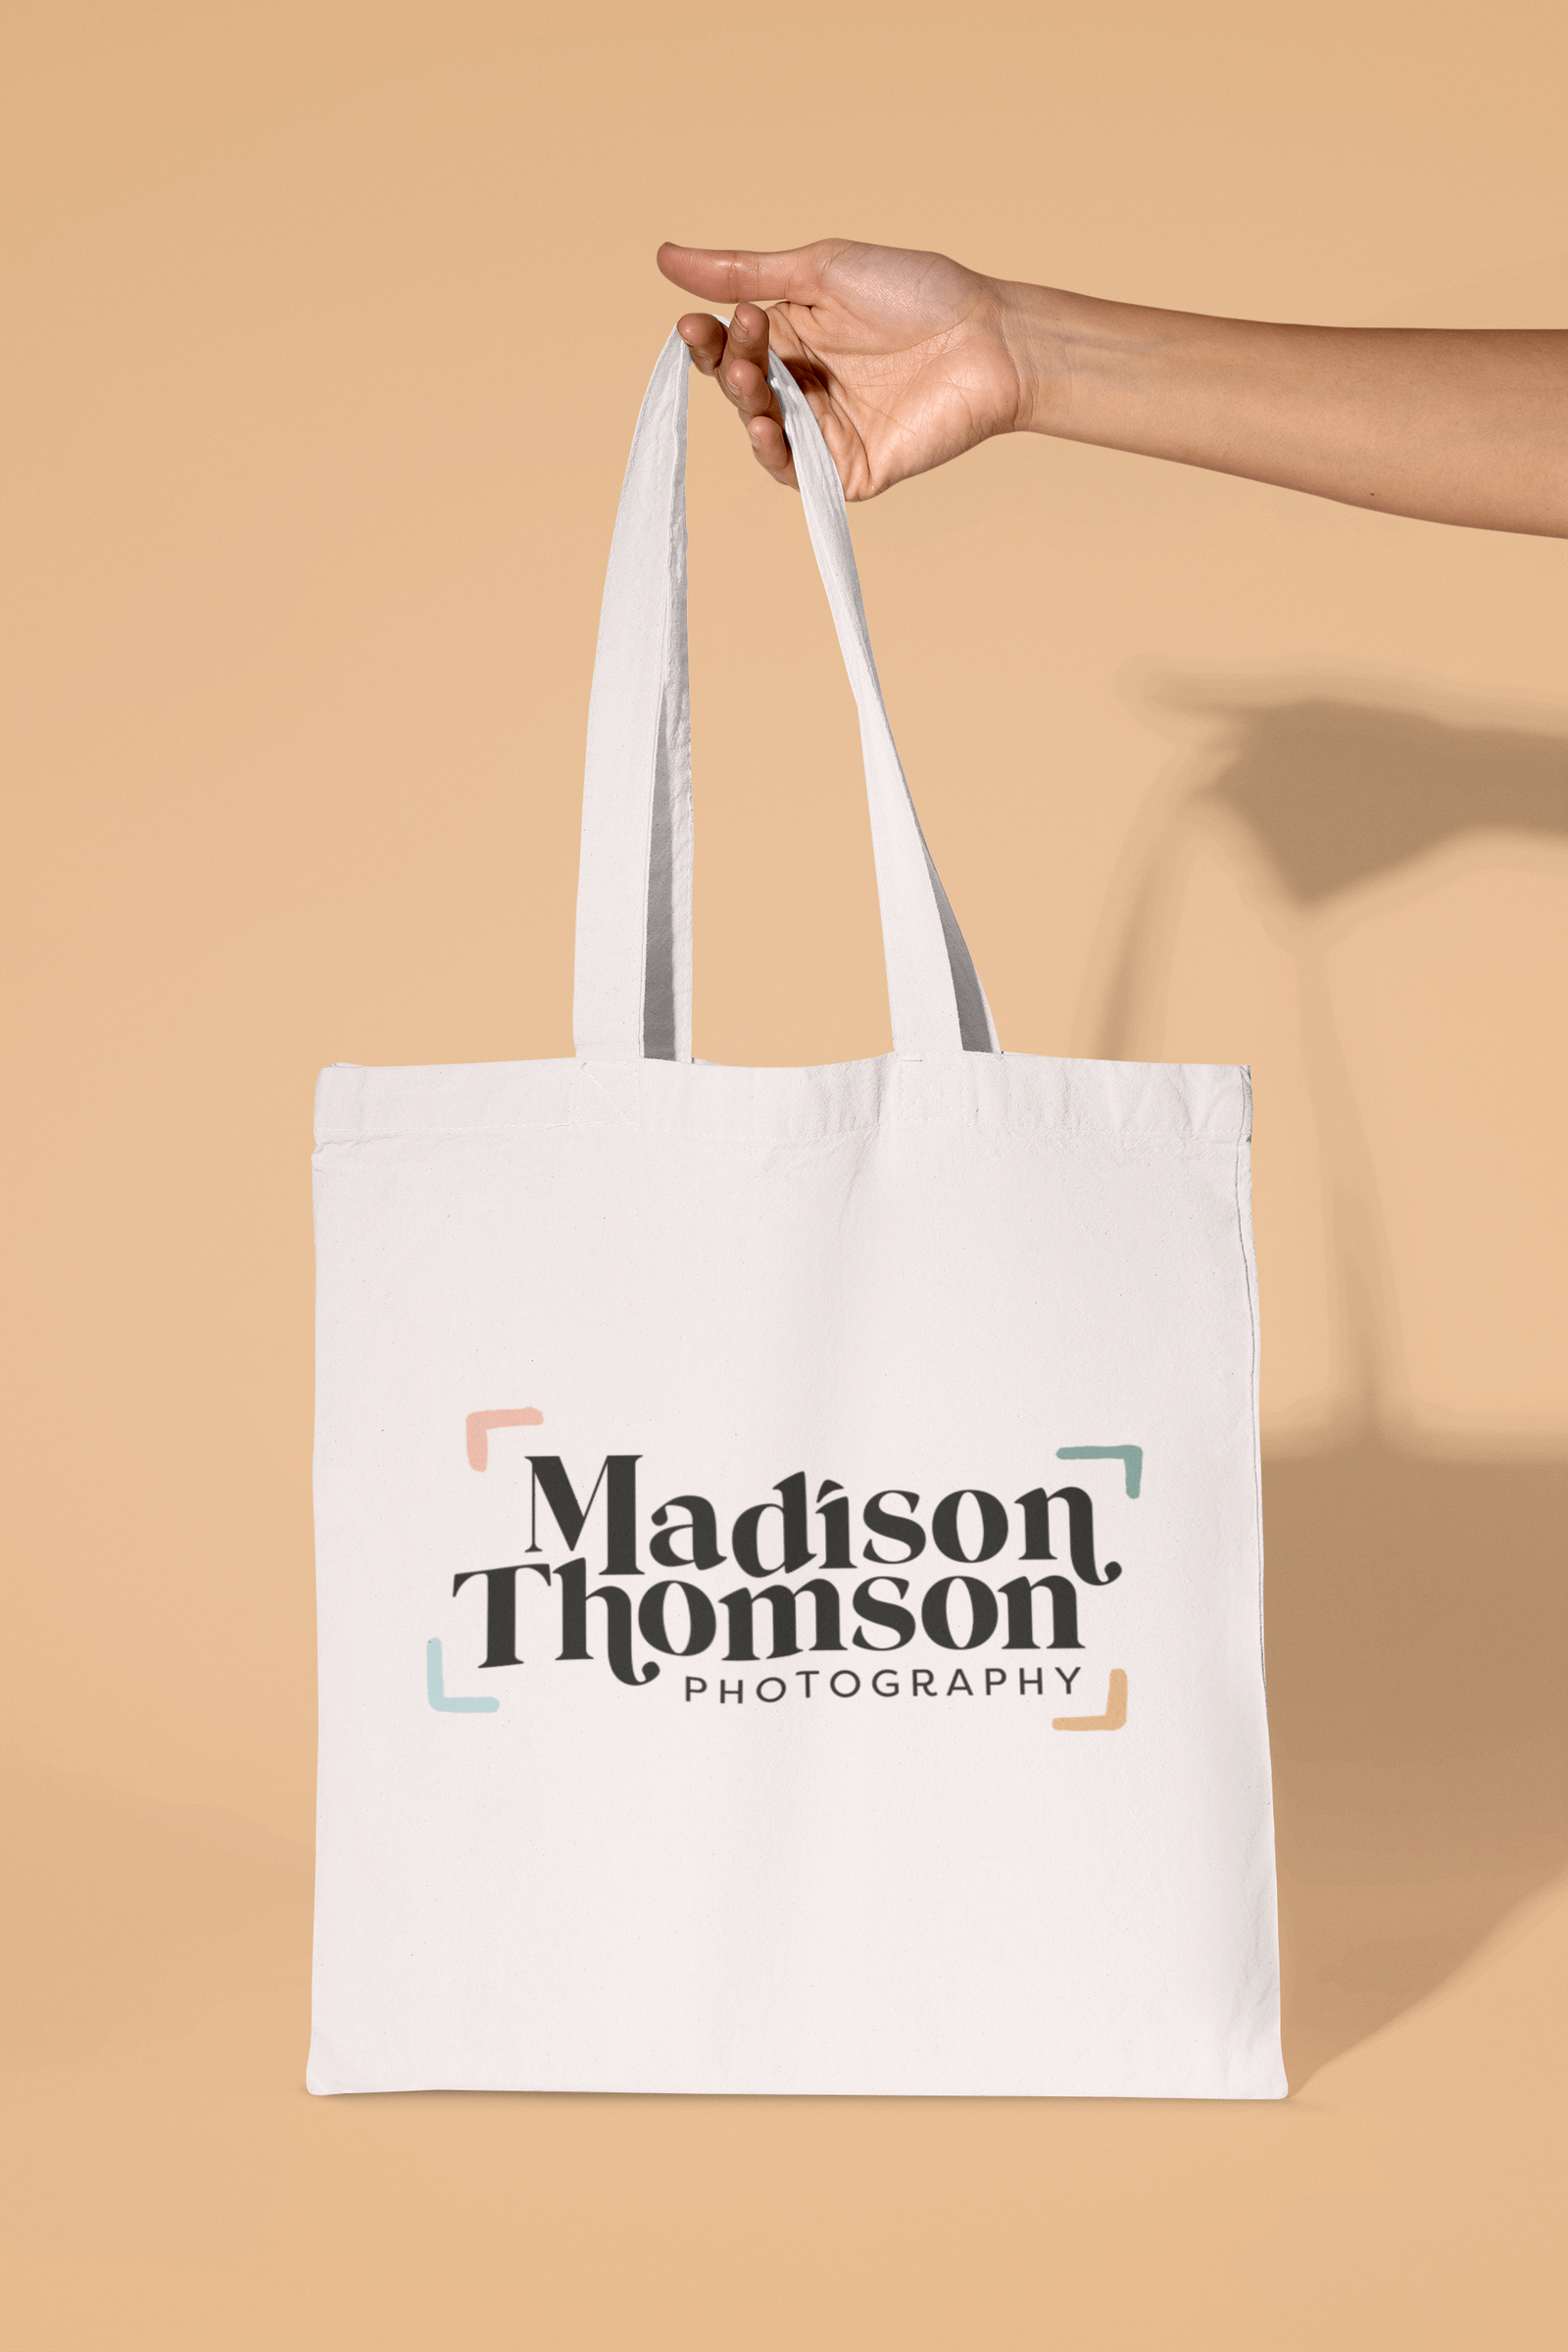 mockup-of-a-person-holding-a-sublimated-tote-bag-against-a-colorful-background-m32232 (1)